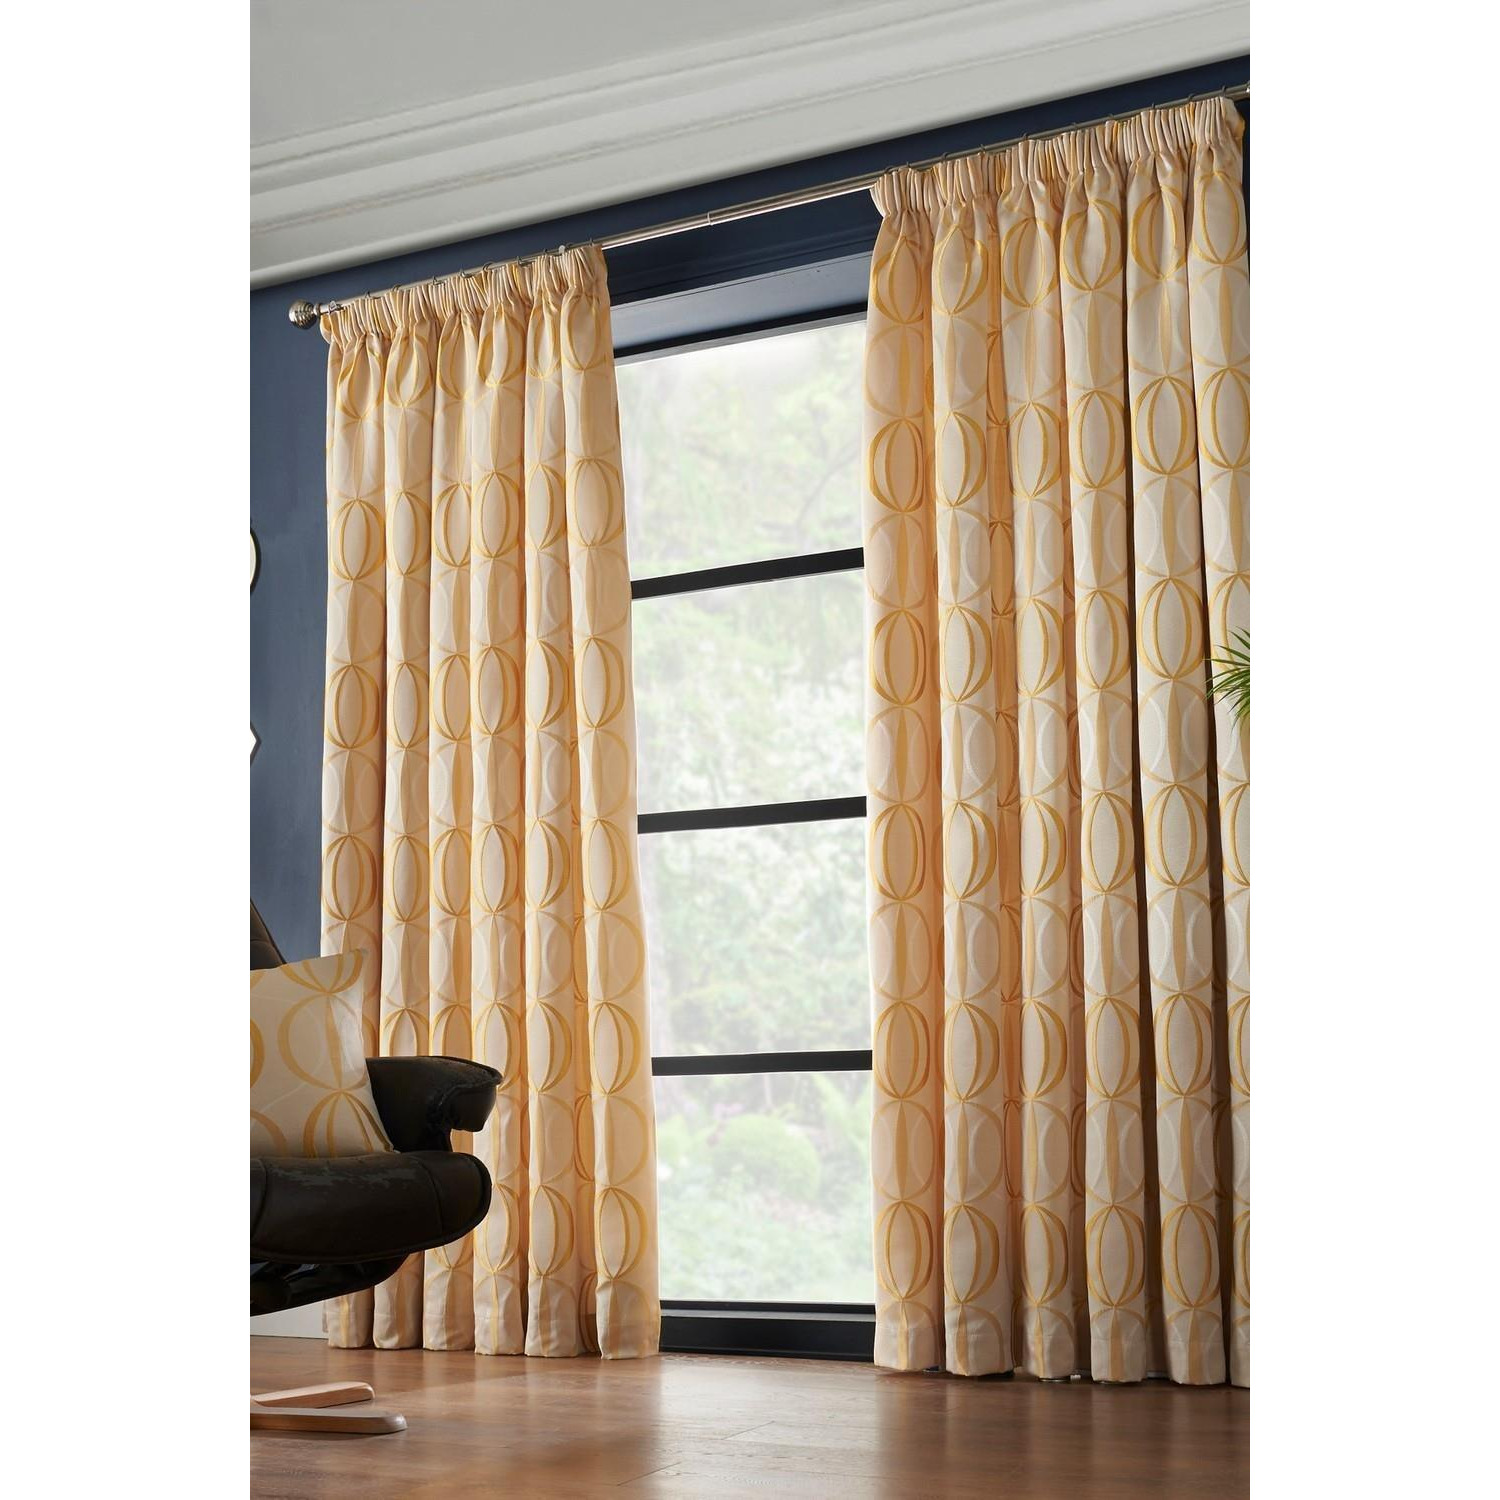 Omega Lined Taped Pencil Pleat Curtains - image 1